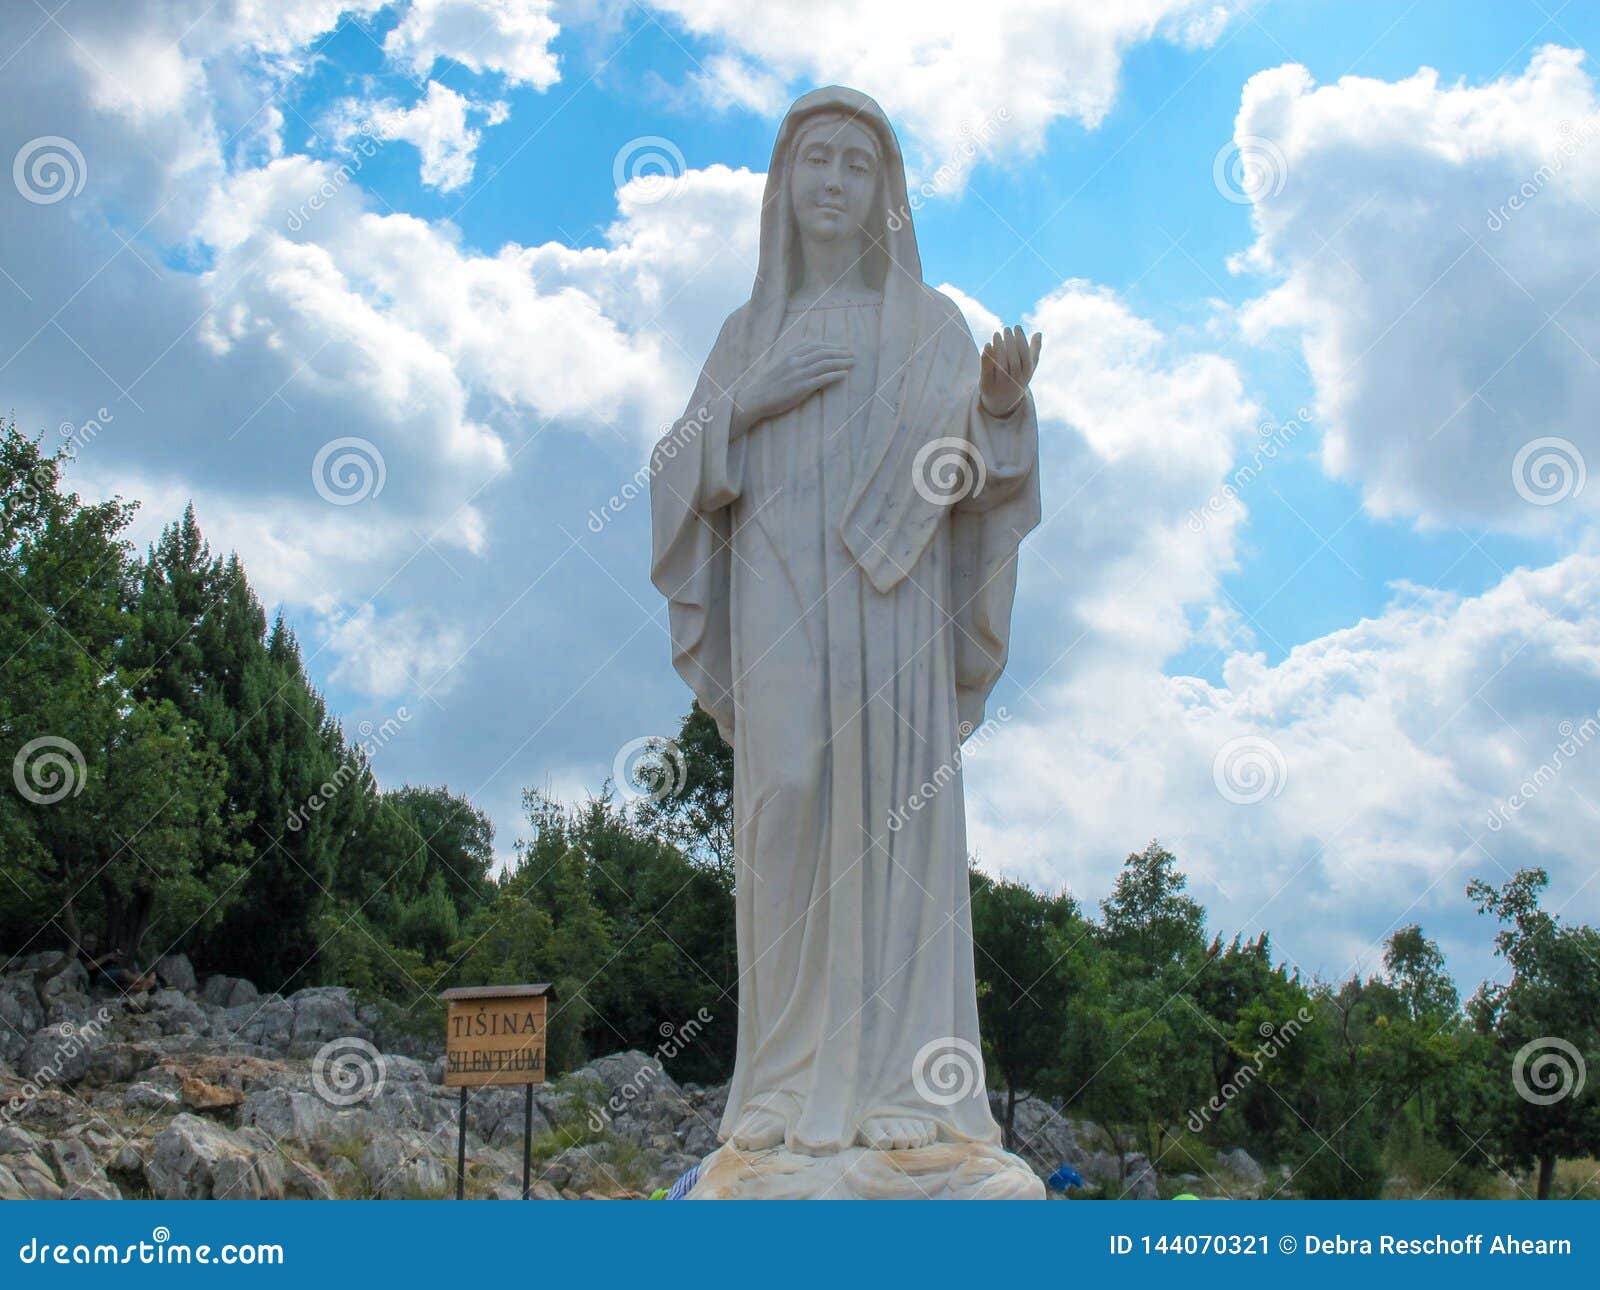 713 Medjugorje Photos Free Royalty Free Stock Photos From Dreamstime